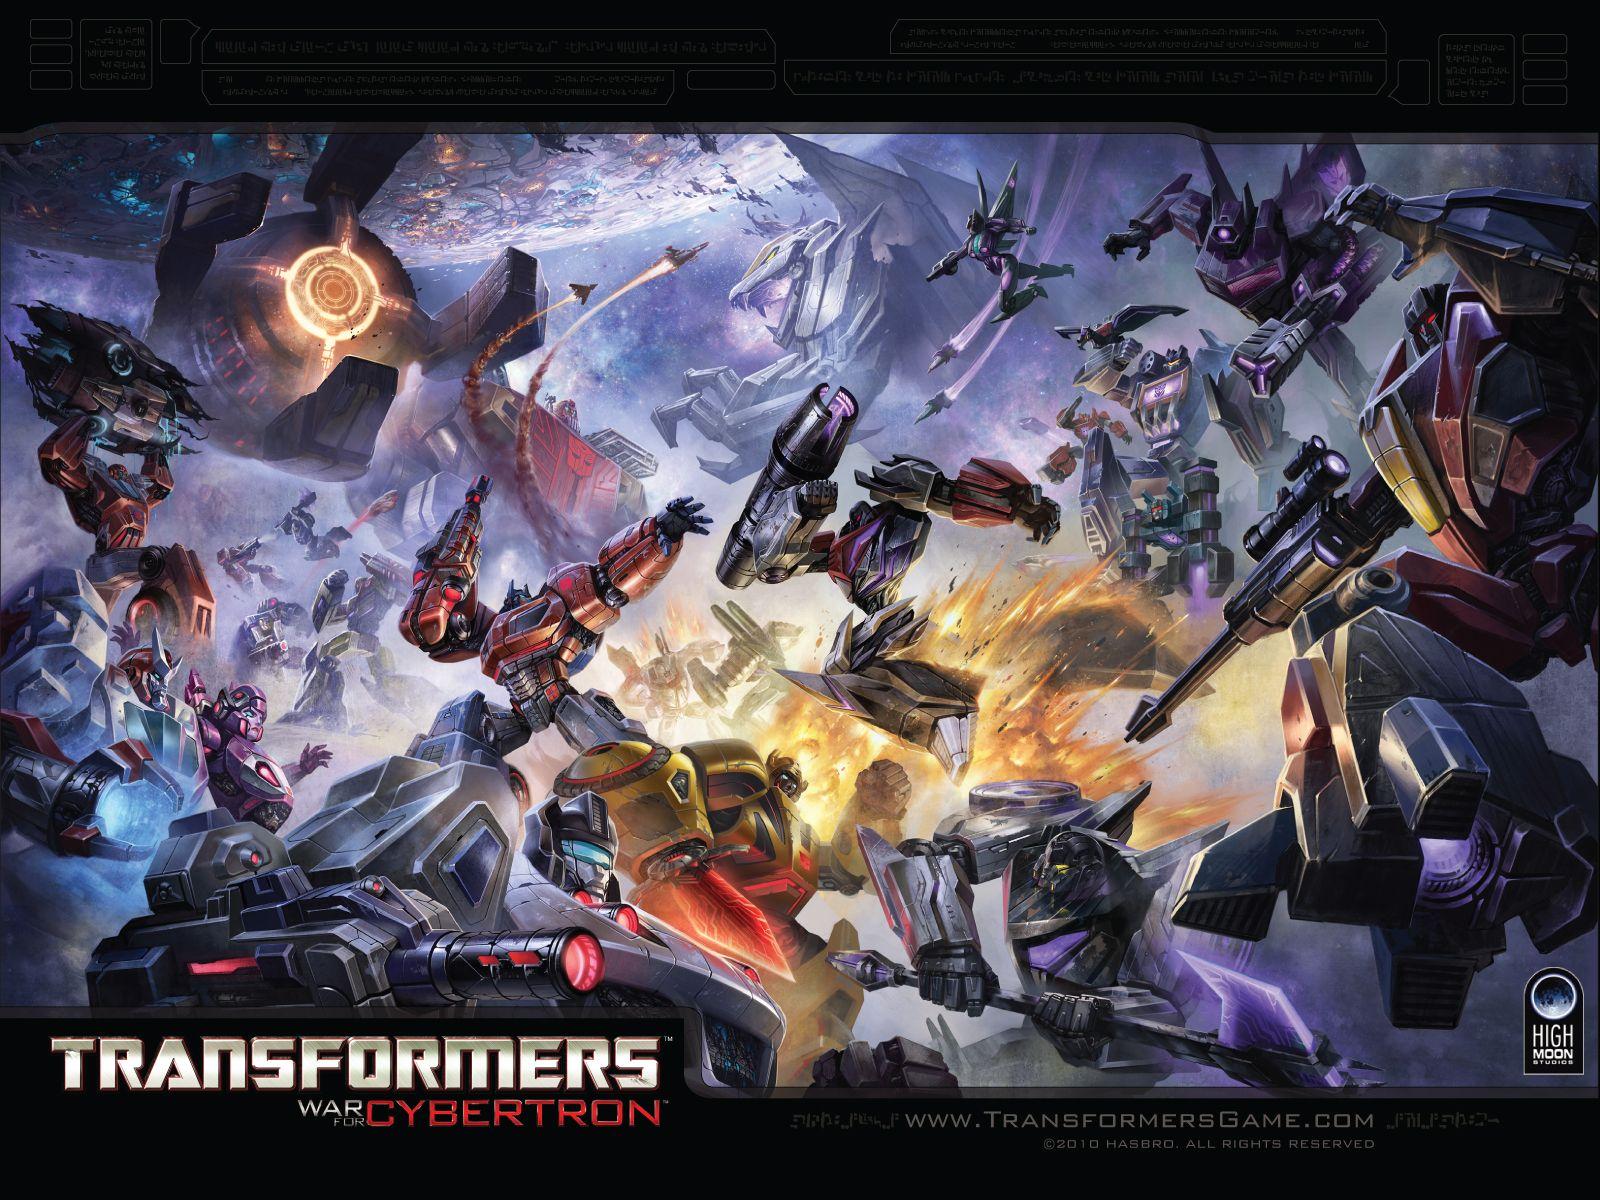 Transformers: War for Cybertron 10x XP Posters and Wallpaper